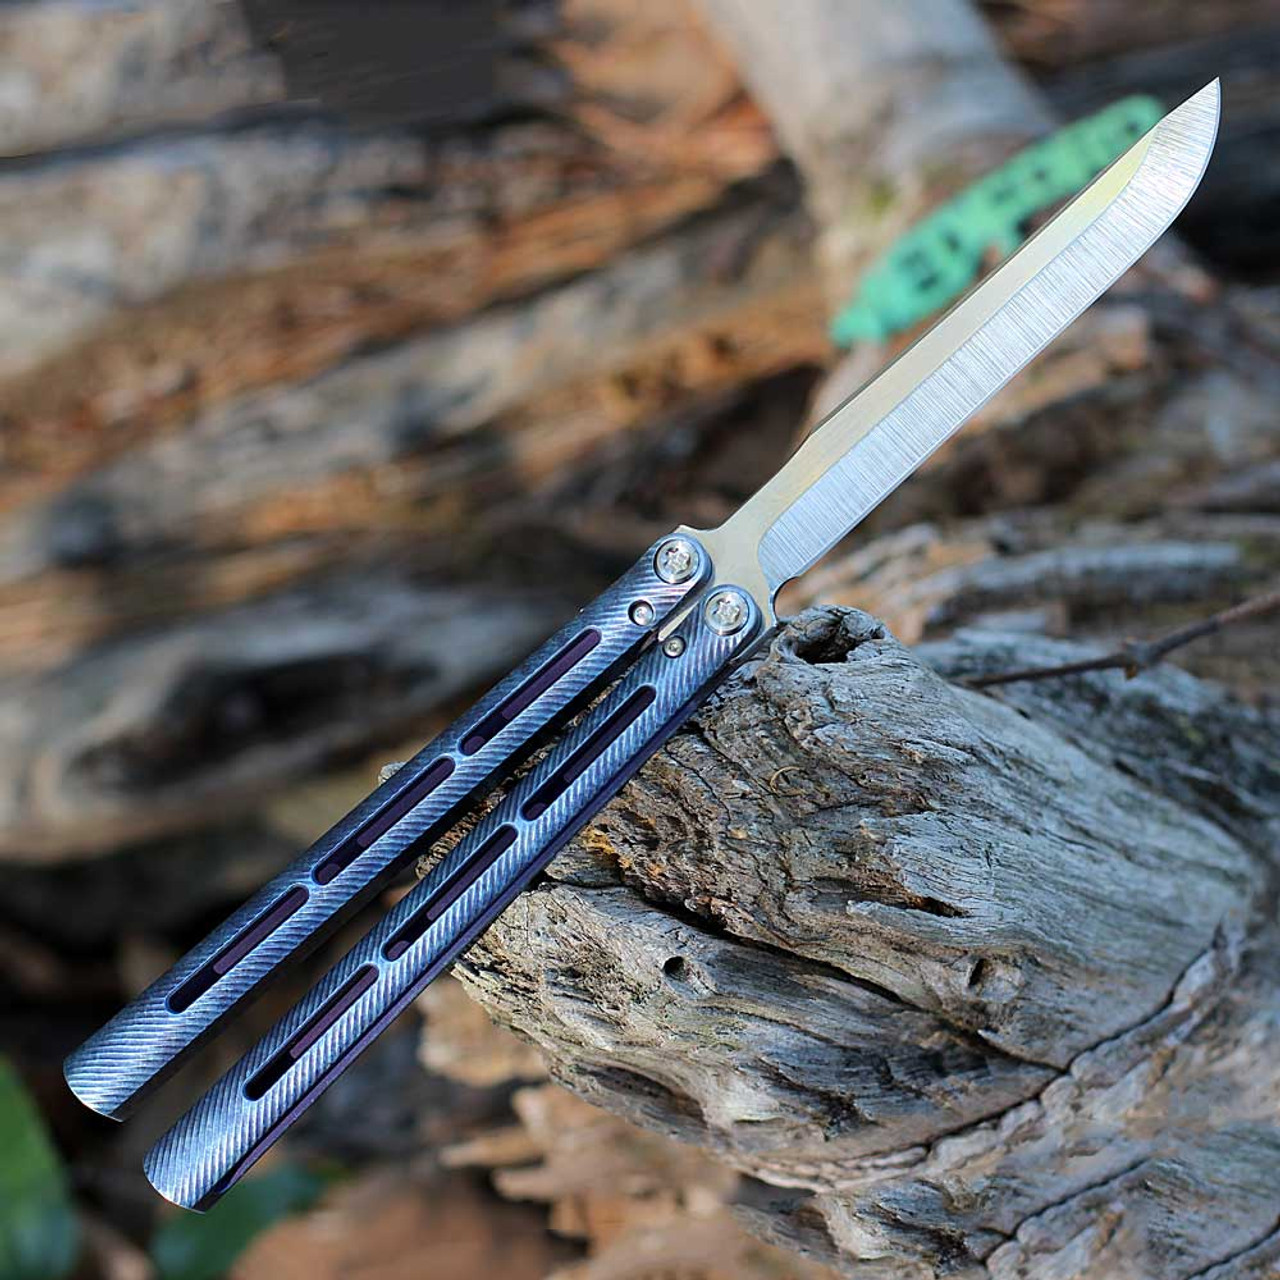 Medford Knife & Tool Viceroy Balisong Butterfly Knife - 4.85" Tumbled CPM-S45VN Drop Point Plain Blade, Blue Sponge Anodized Titanium Handle